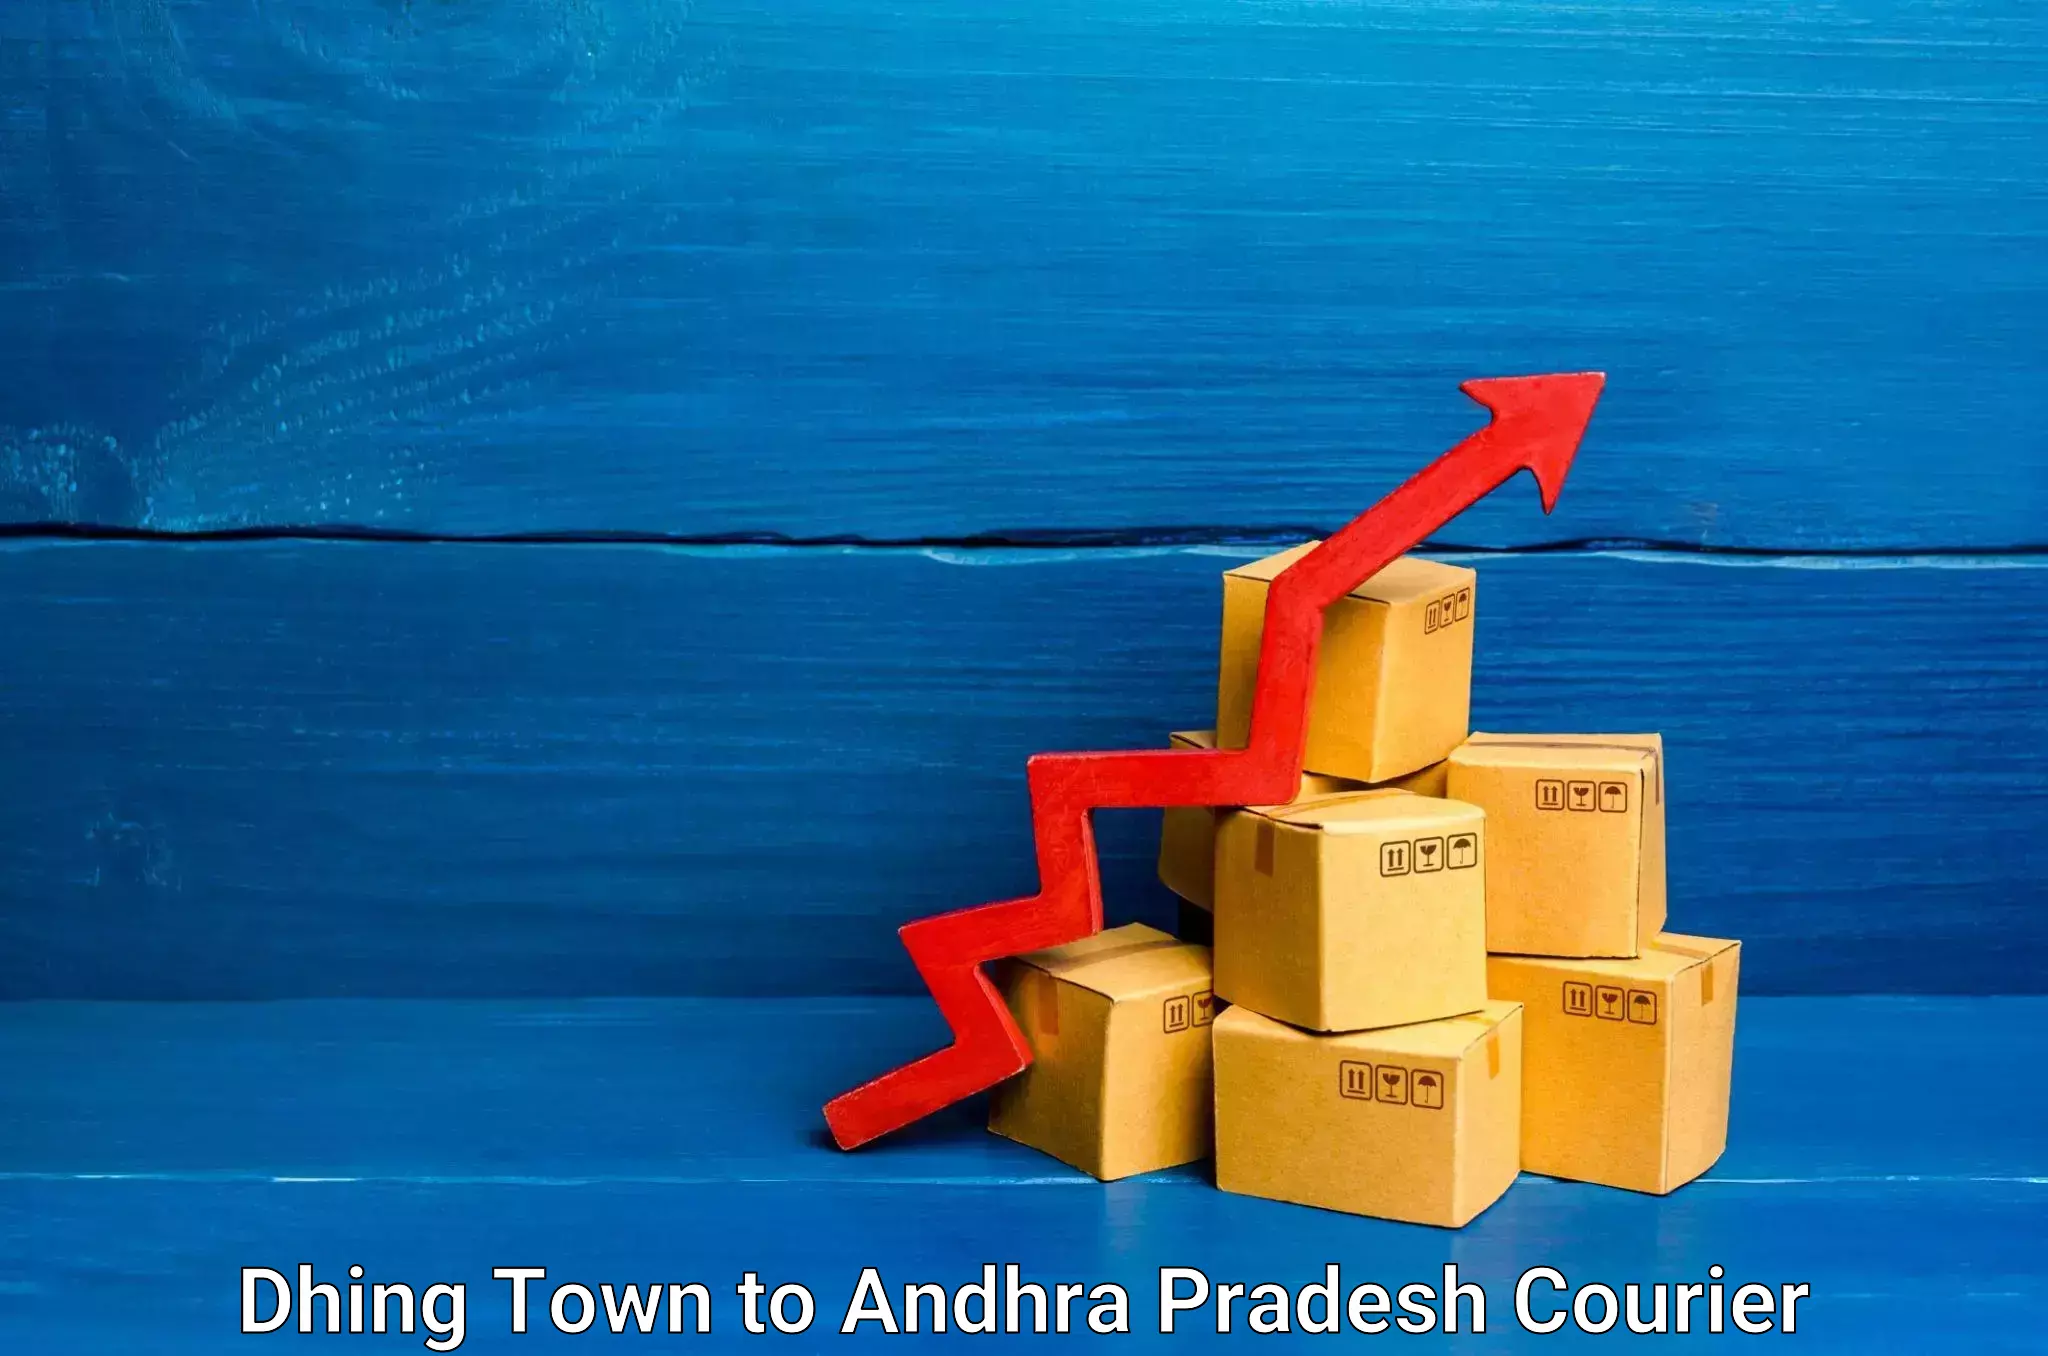 Overnight delivery services Dhing Town to Andhra Pradesh